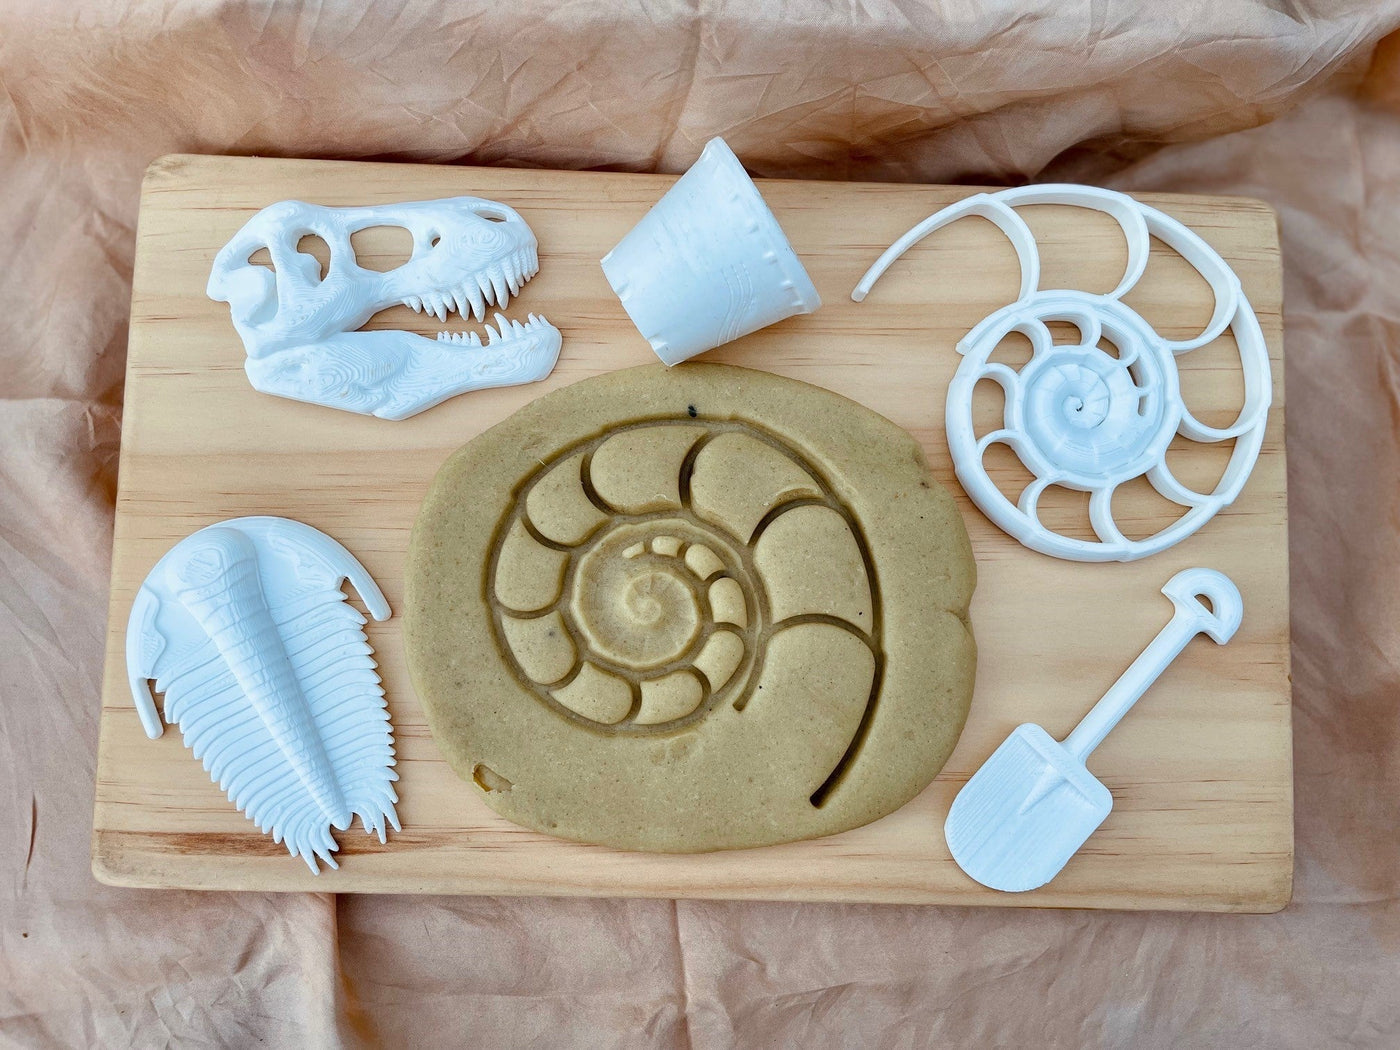 Dino Fossil Dig Sensory Play Pack